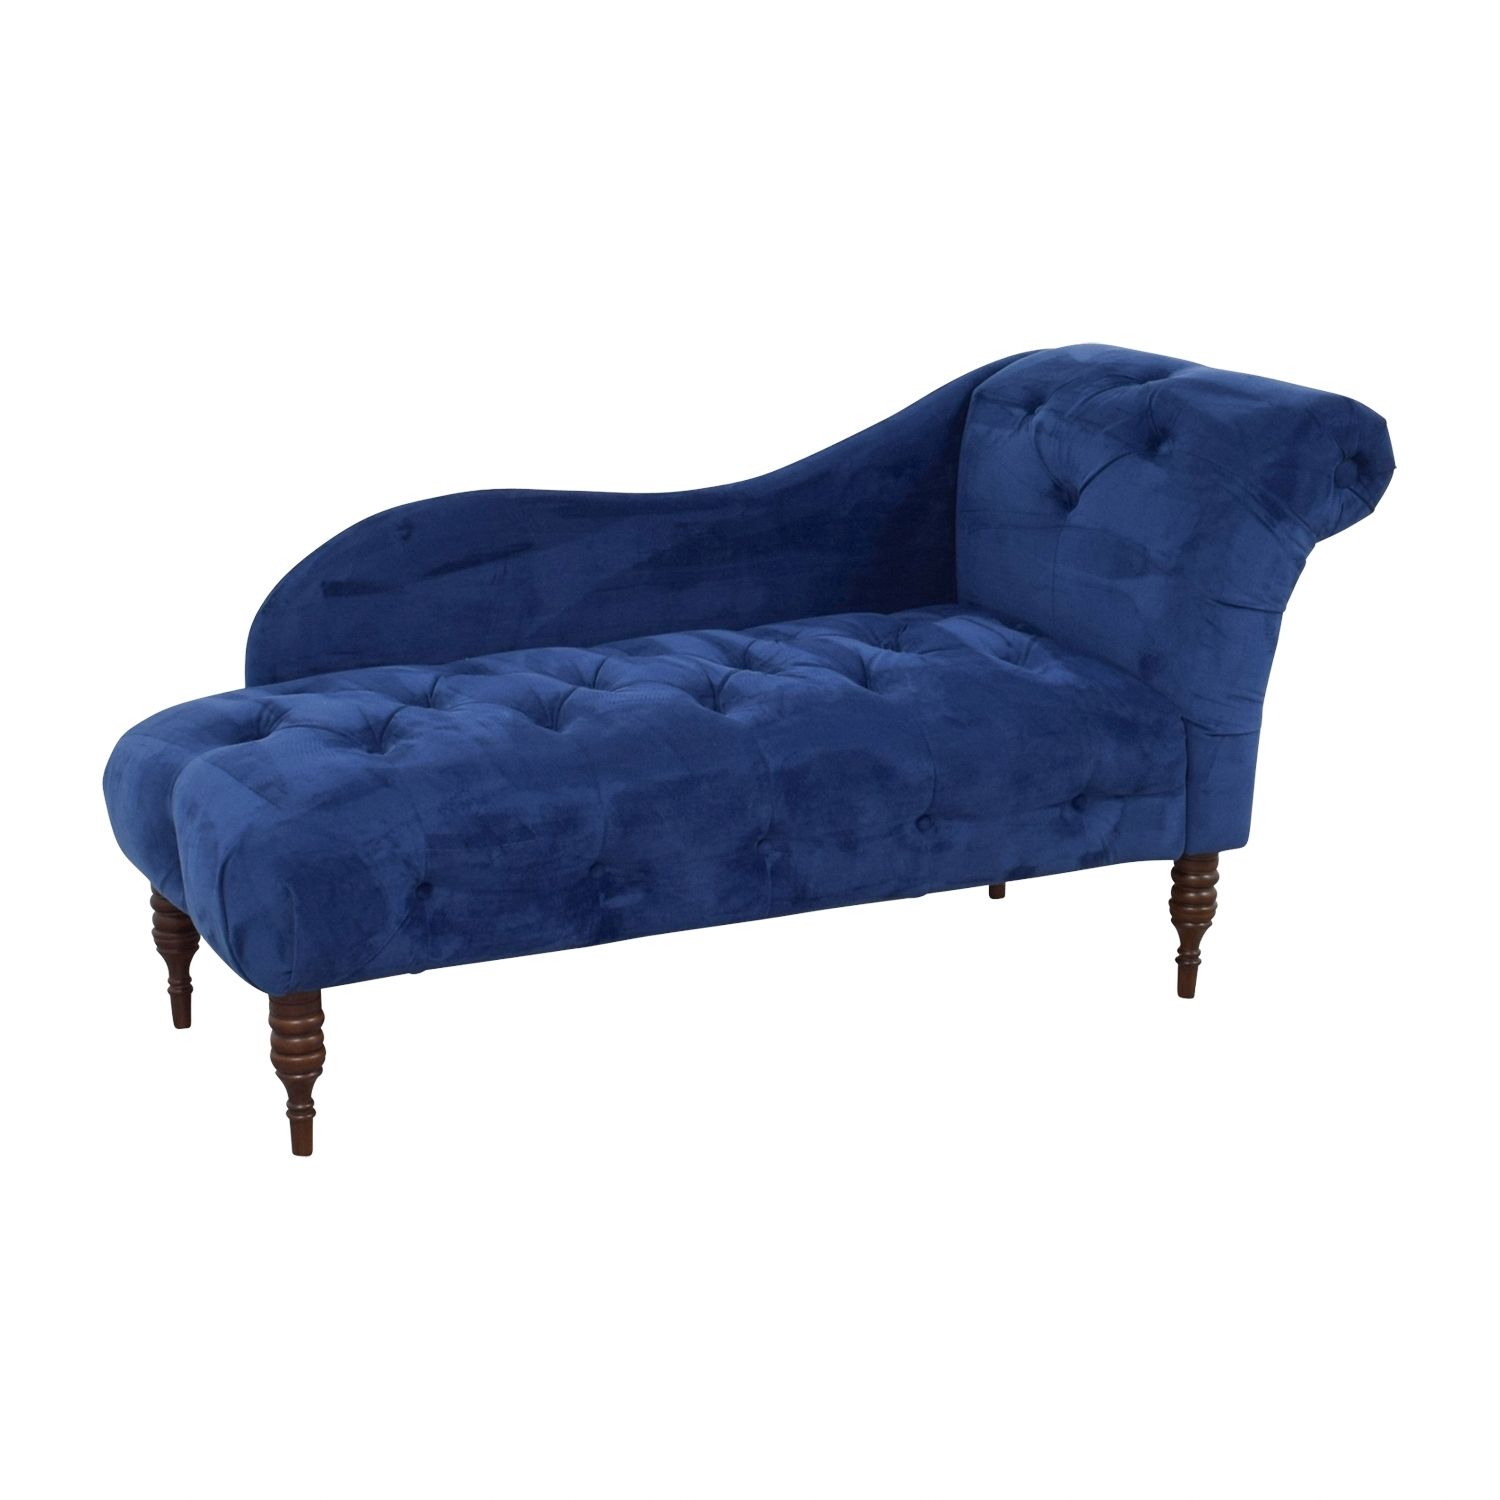 [%39% Off – One Kings Lane One Kings Lane Abbyson Francis Tufted In Most Recently Released Blue Chaises|blue Chaises Regarding Widely Used 39% Off – One Kings Lane One Kings Lane Abbyson Francis Tufted|most Up To Date Blue Chaises Within 39% Off – One Kings Lane One Kings Lane Abbyson Francis Tufted|most Current 39% Off – One Kings Lane One Kings Lane Abbyson Francis Tufted With Regard To Blue Chaises%] (View 11 of 15)